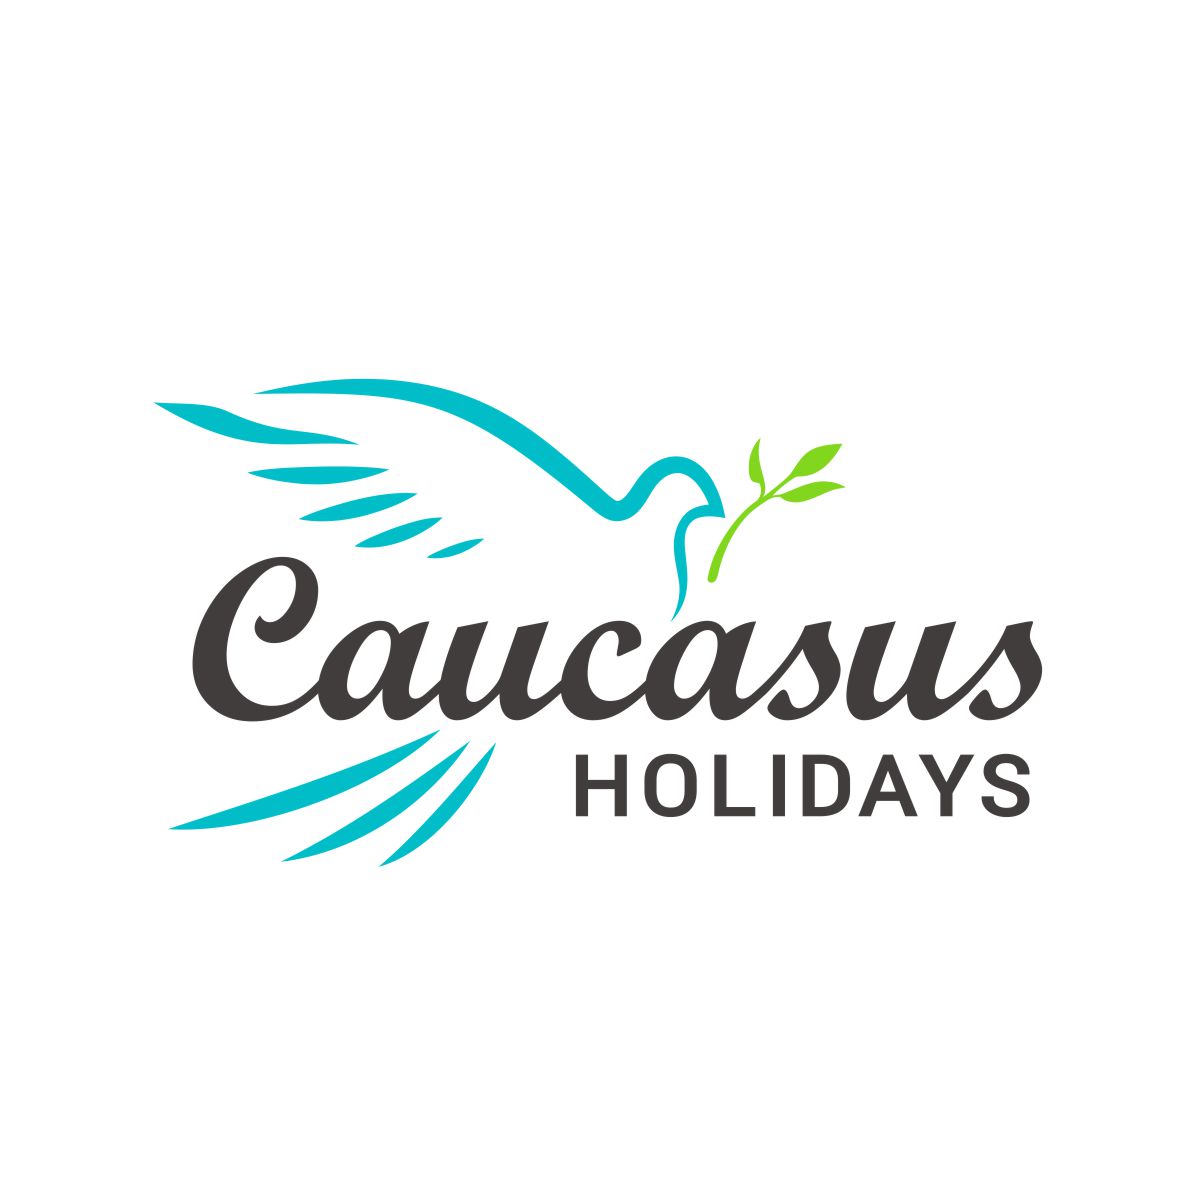 About Caucasus Holidays